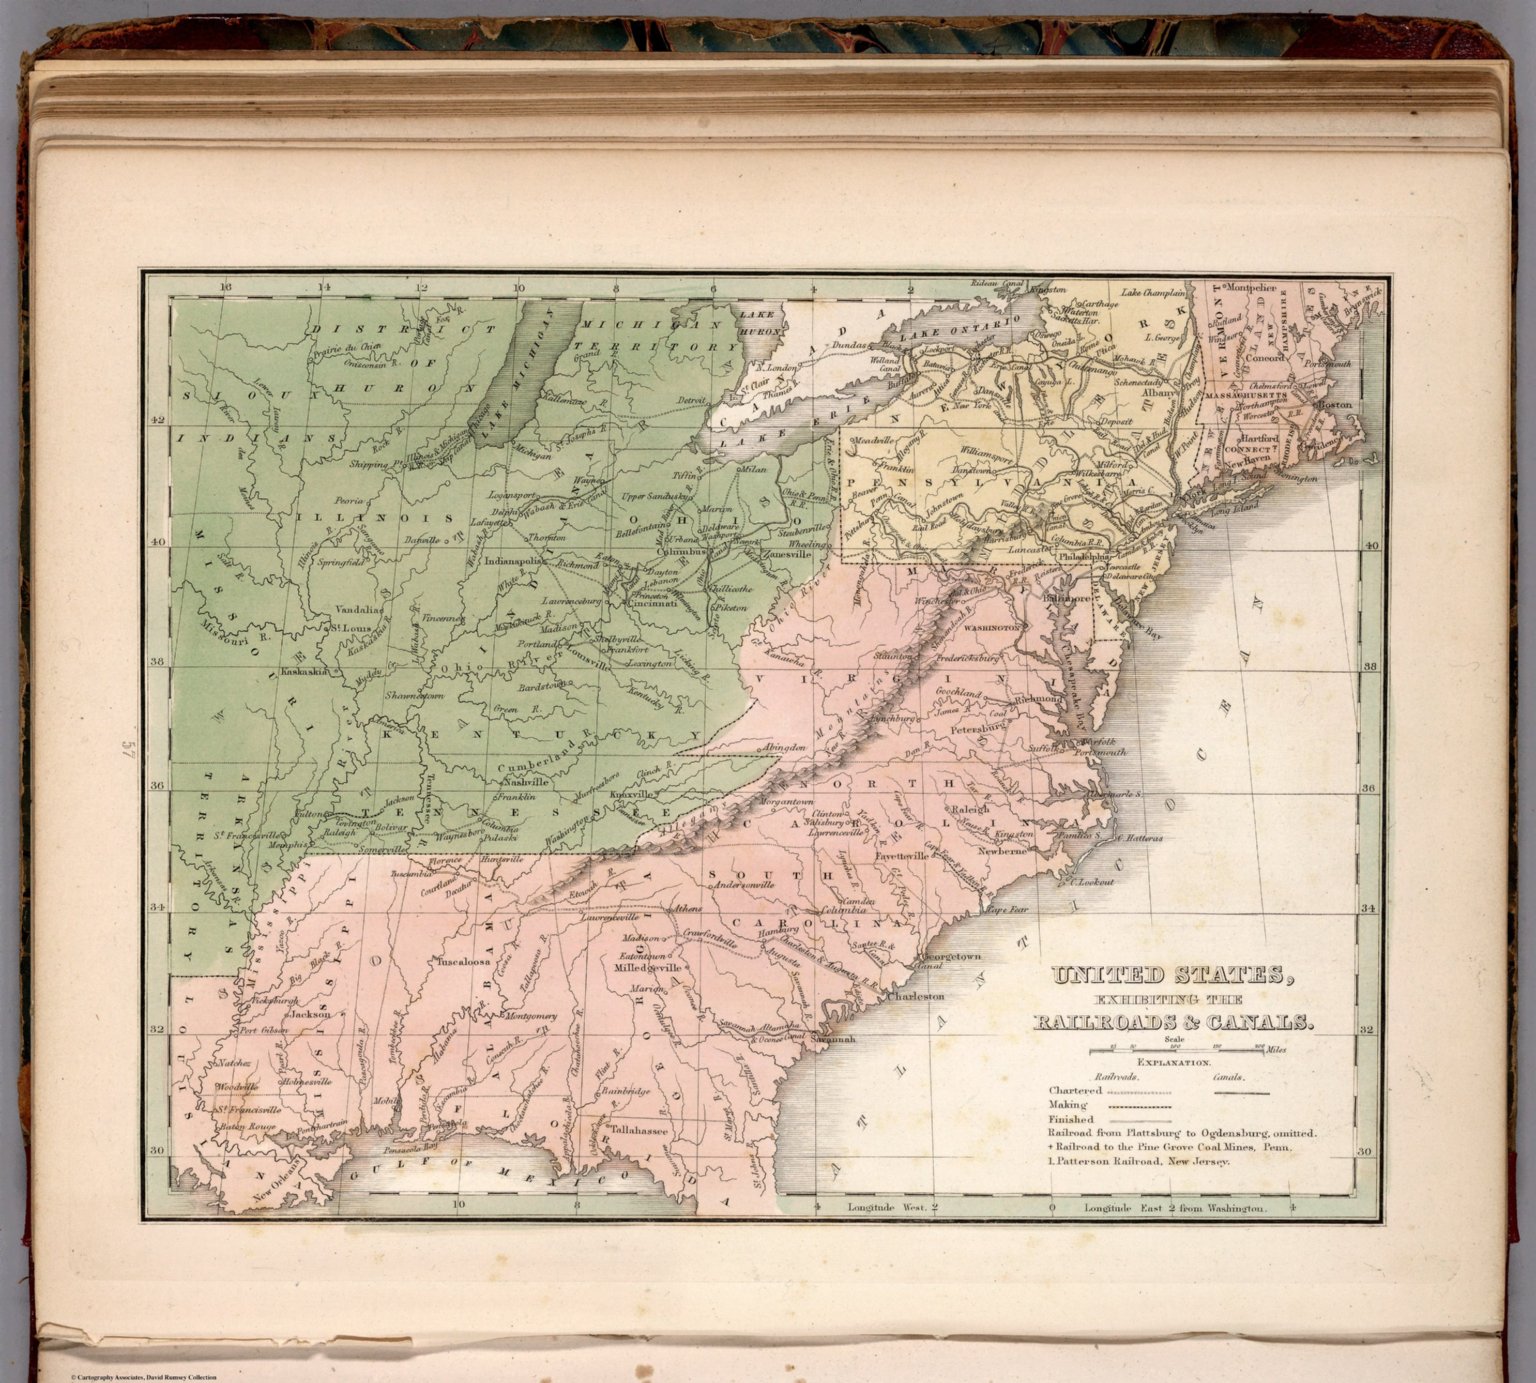 United States, exhibiting the railroads and canals - David Rumsey ...